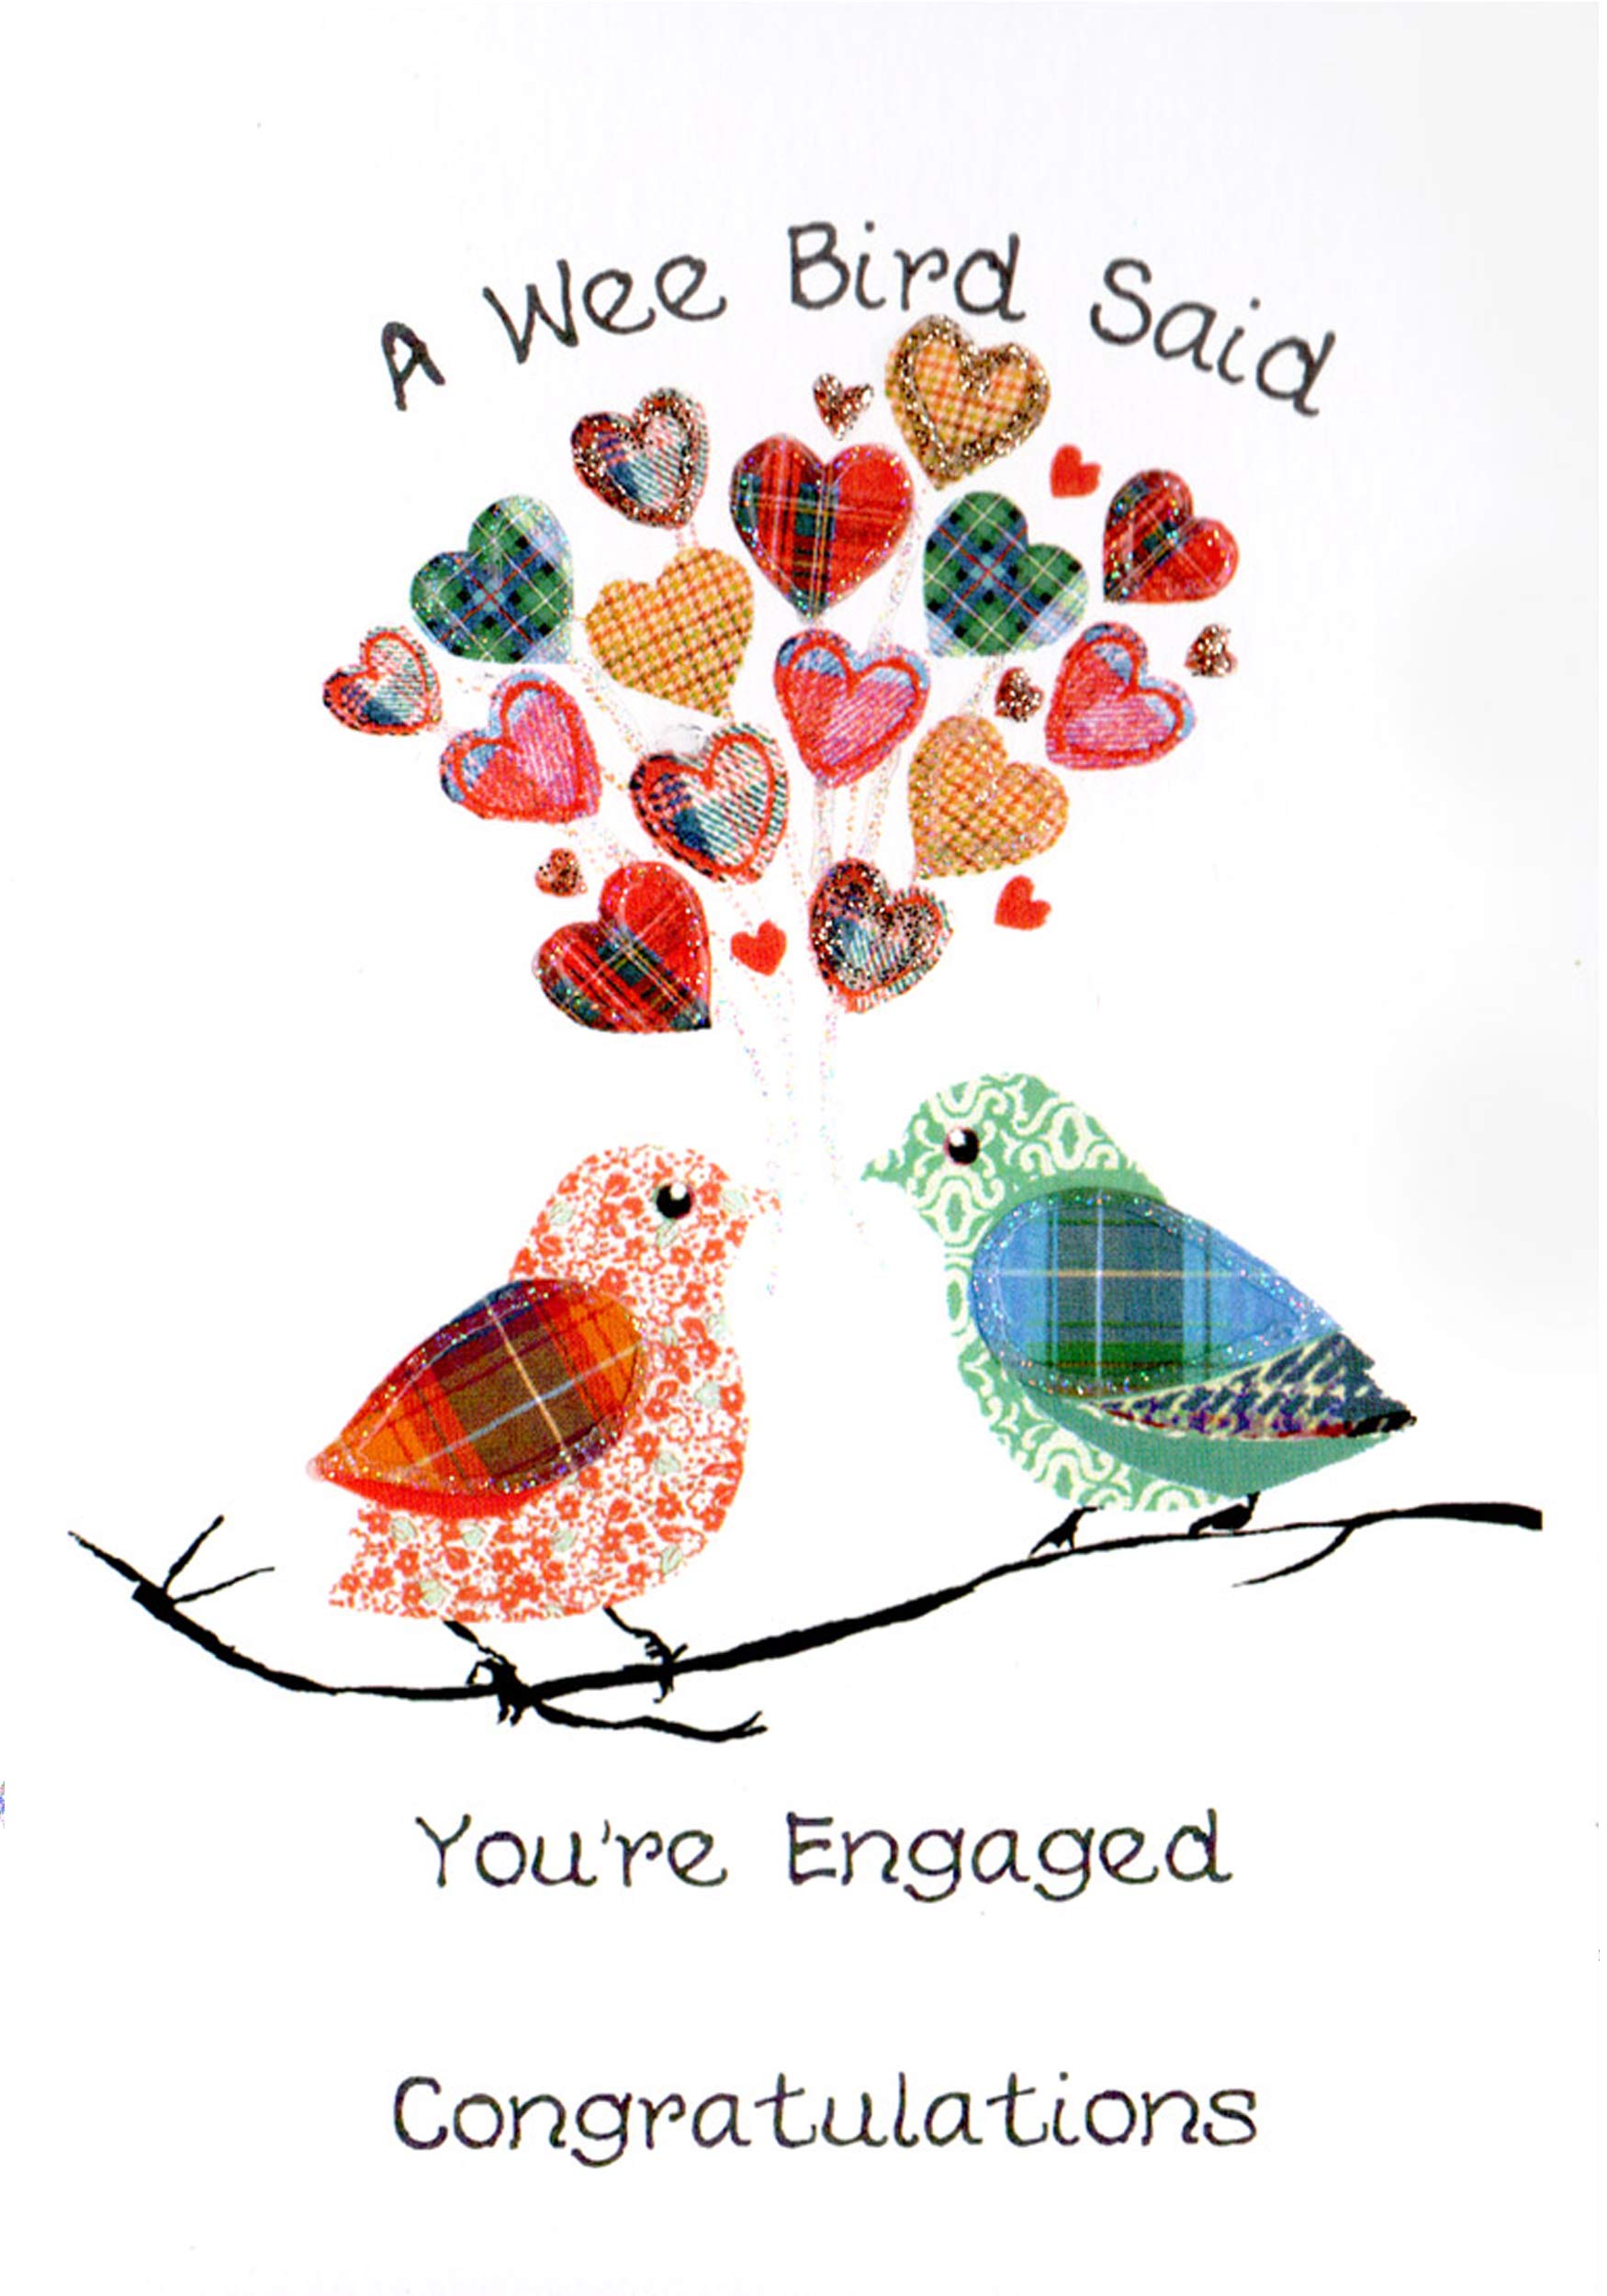 You're Engaged, Congratulations Card